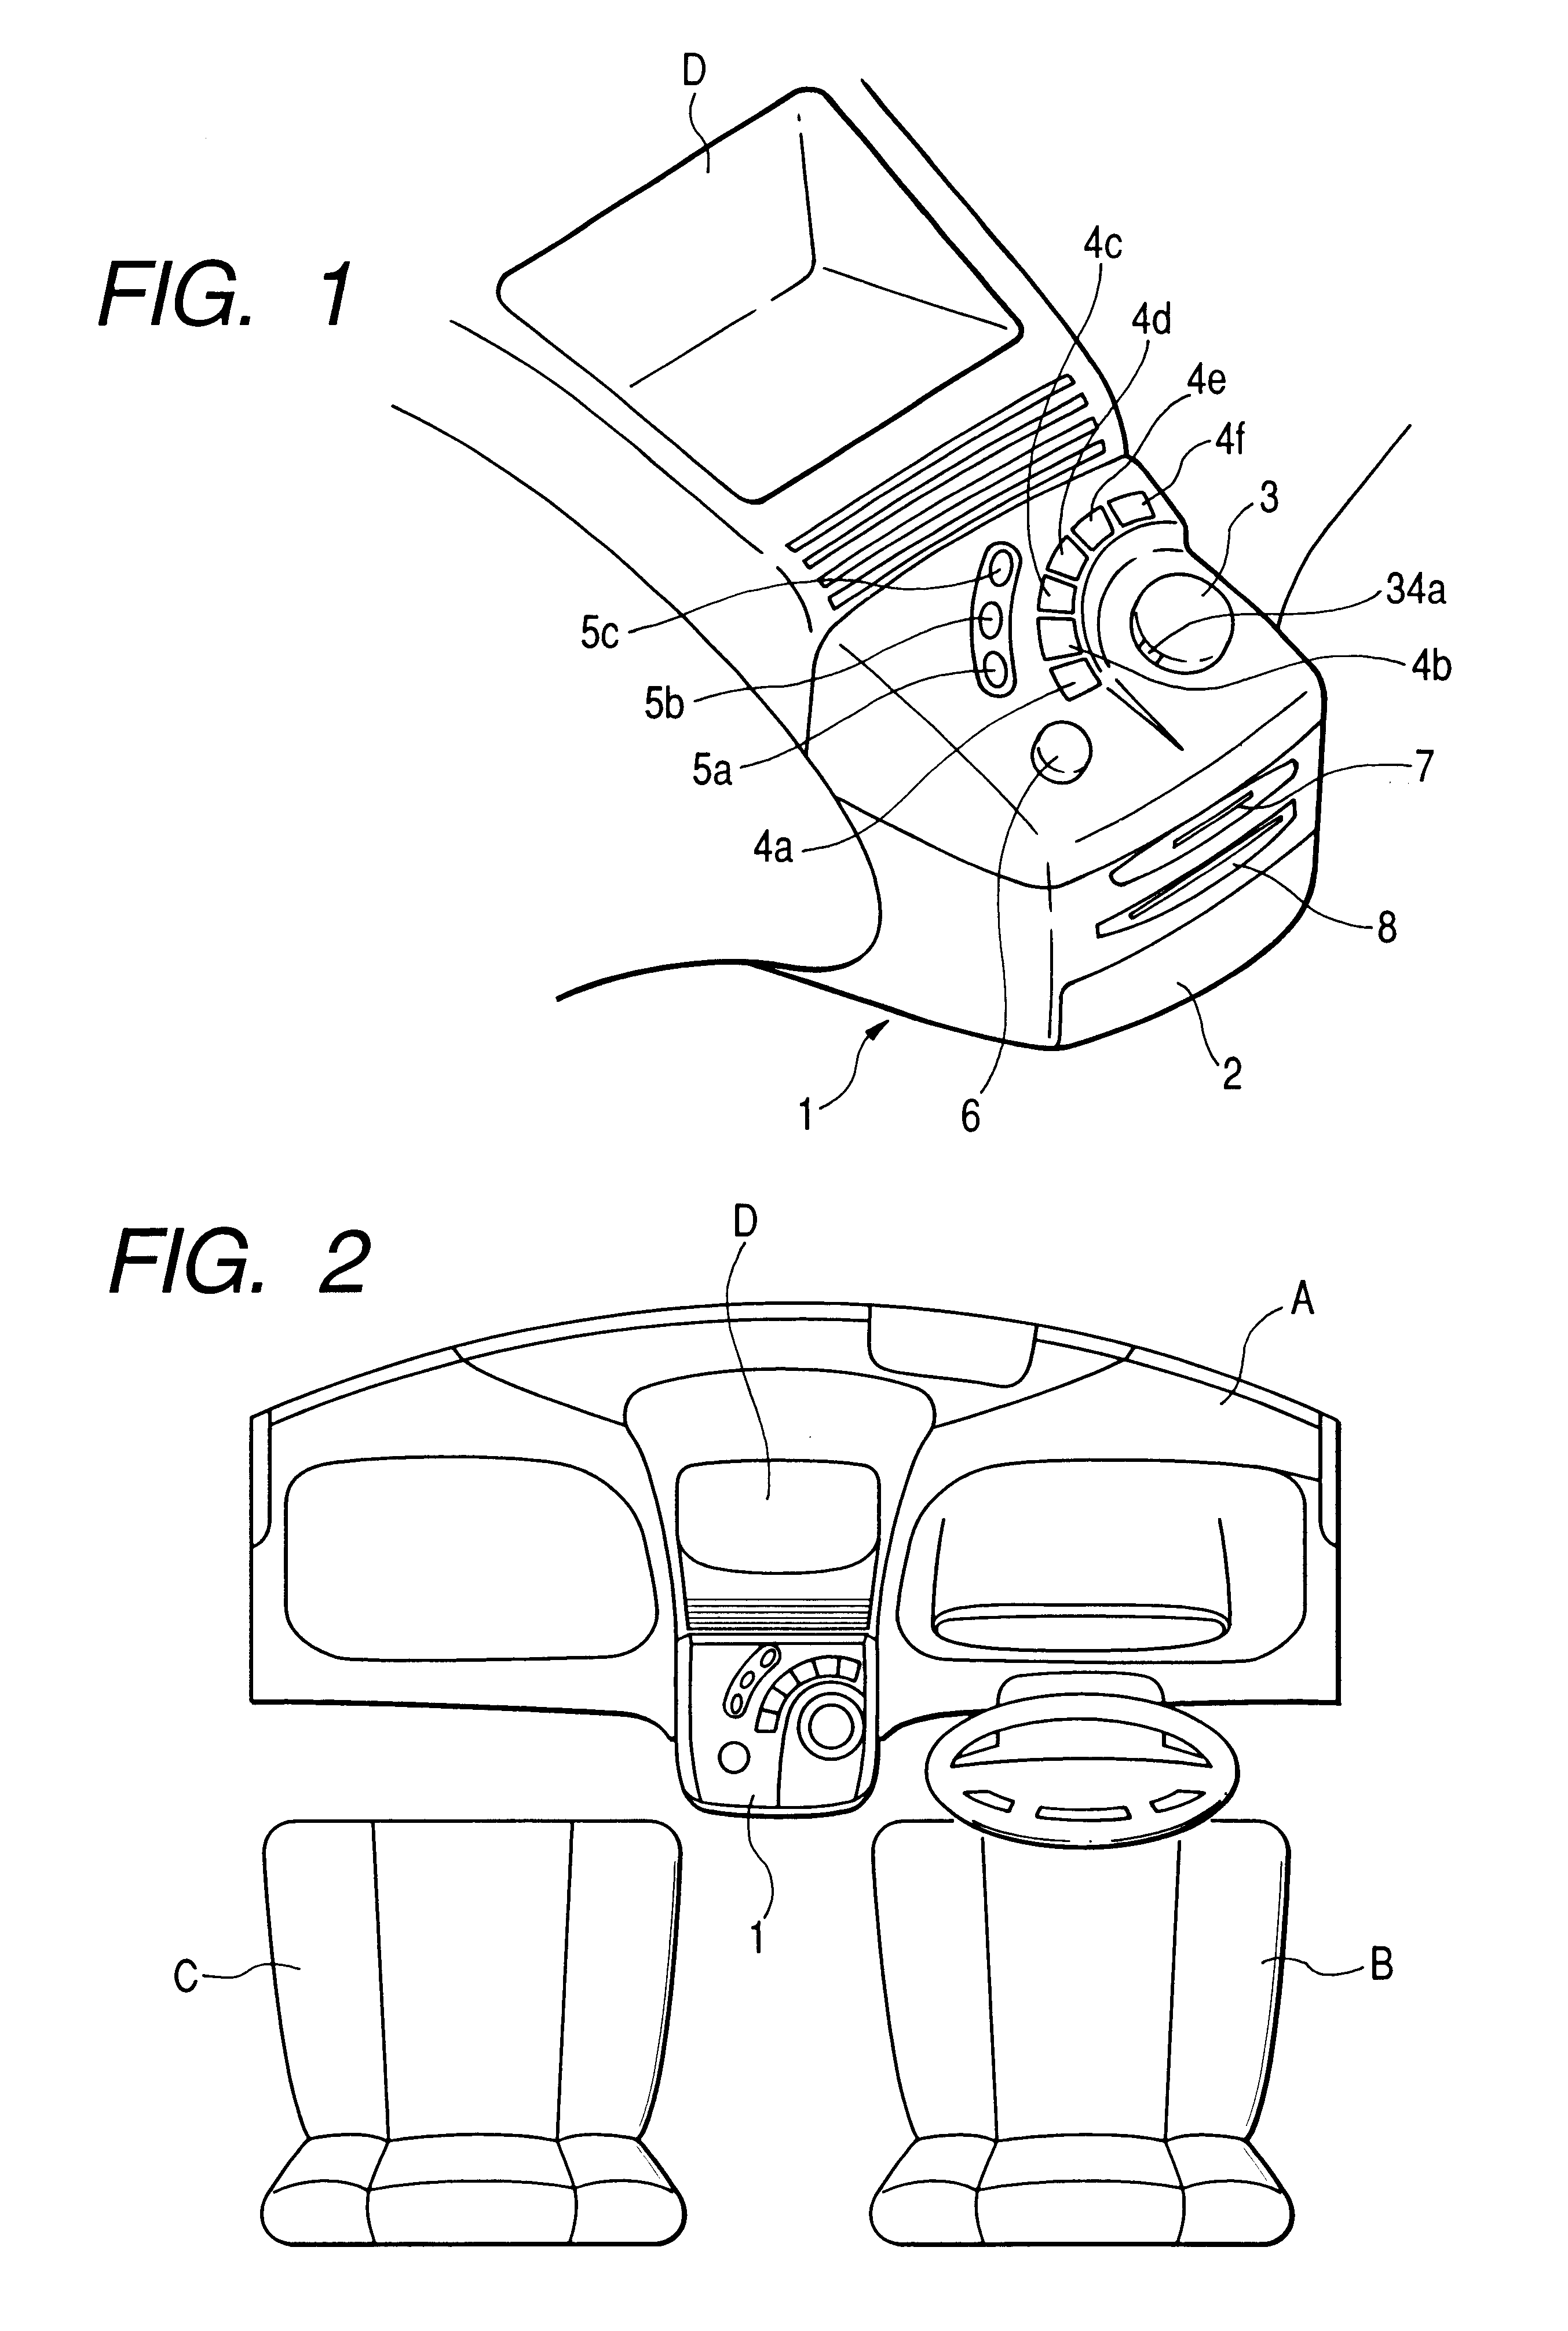 Vehicular input device including single manual operating unit for operating various electronic devices mounted on vehicle